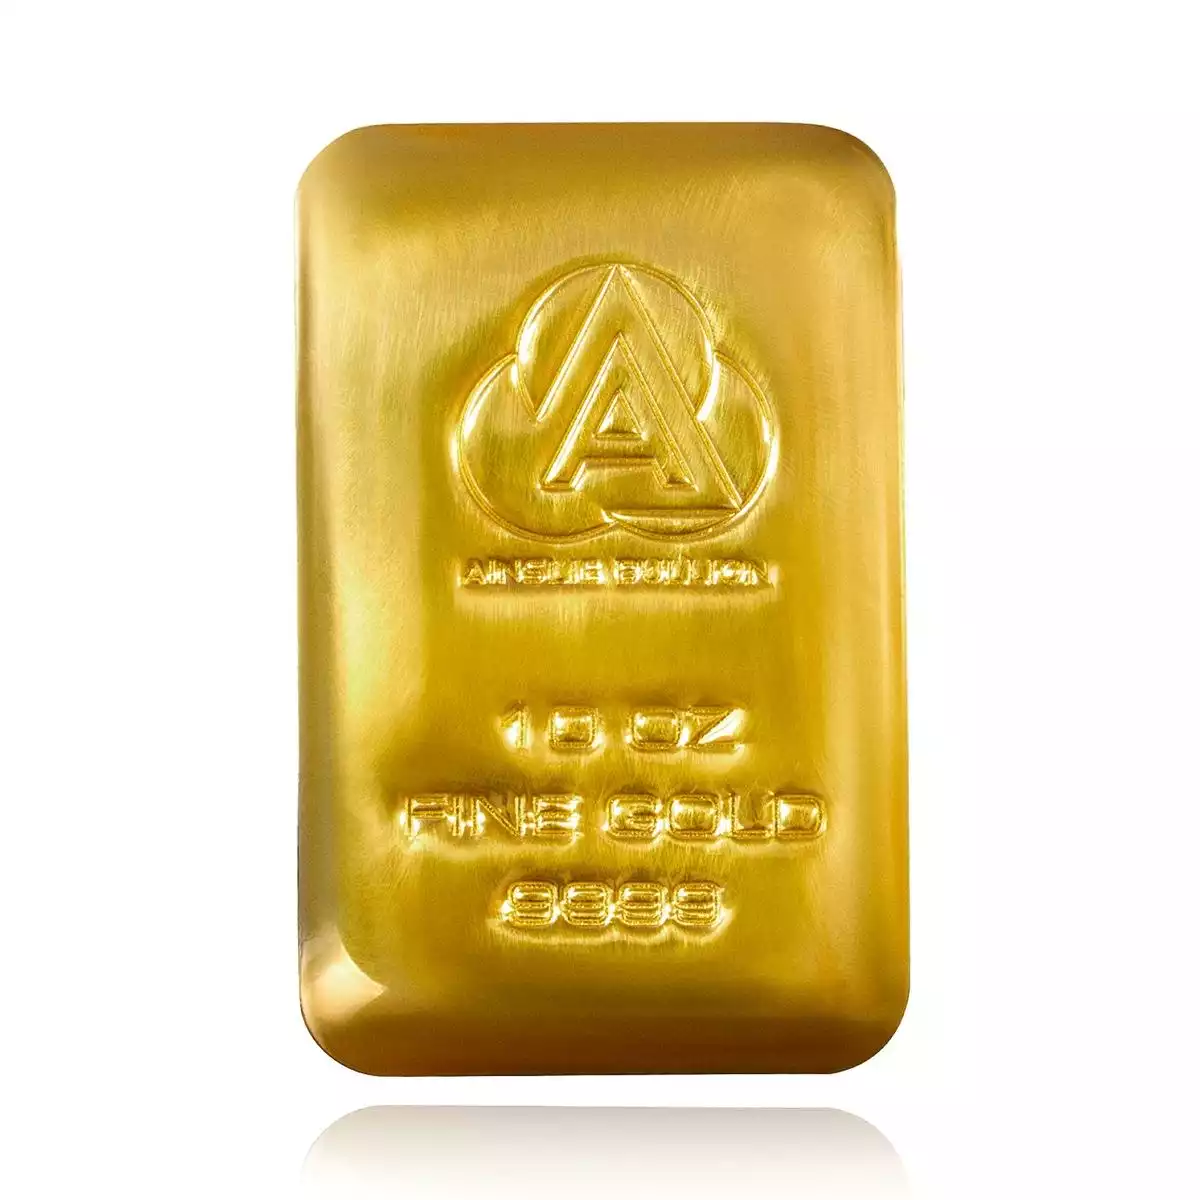 10 oz ainslie gold bullion. our most popular gold bar, the 10oz ainslie gold bar is an excellent way for investors to continue building their gold por...